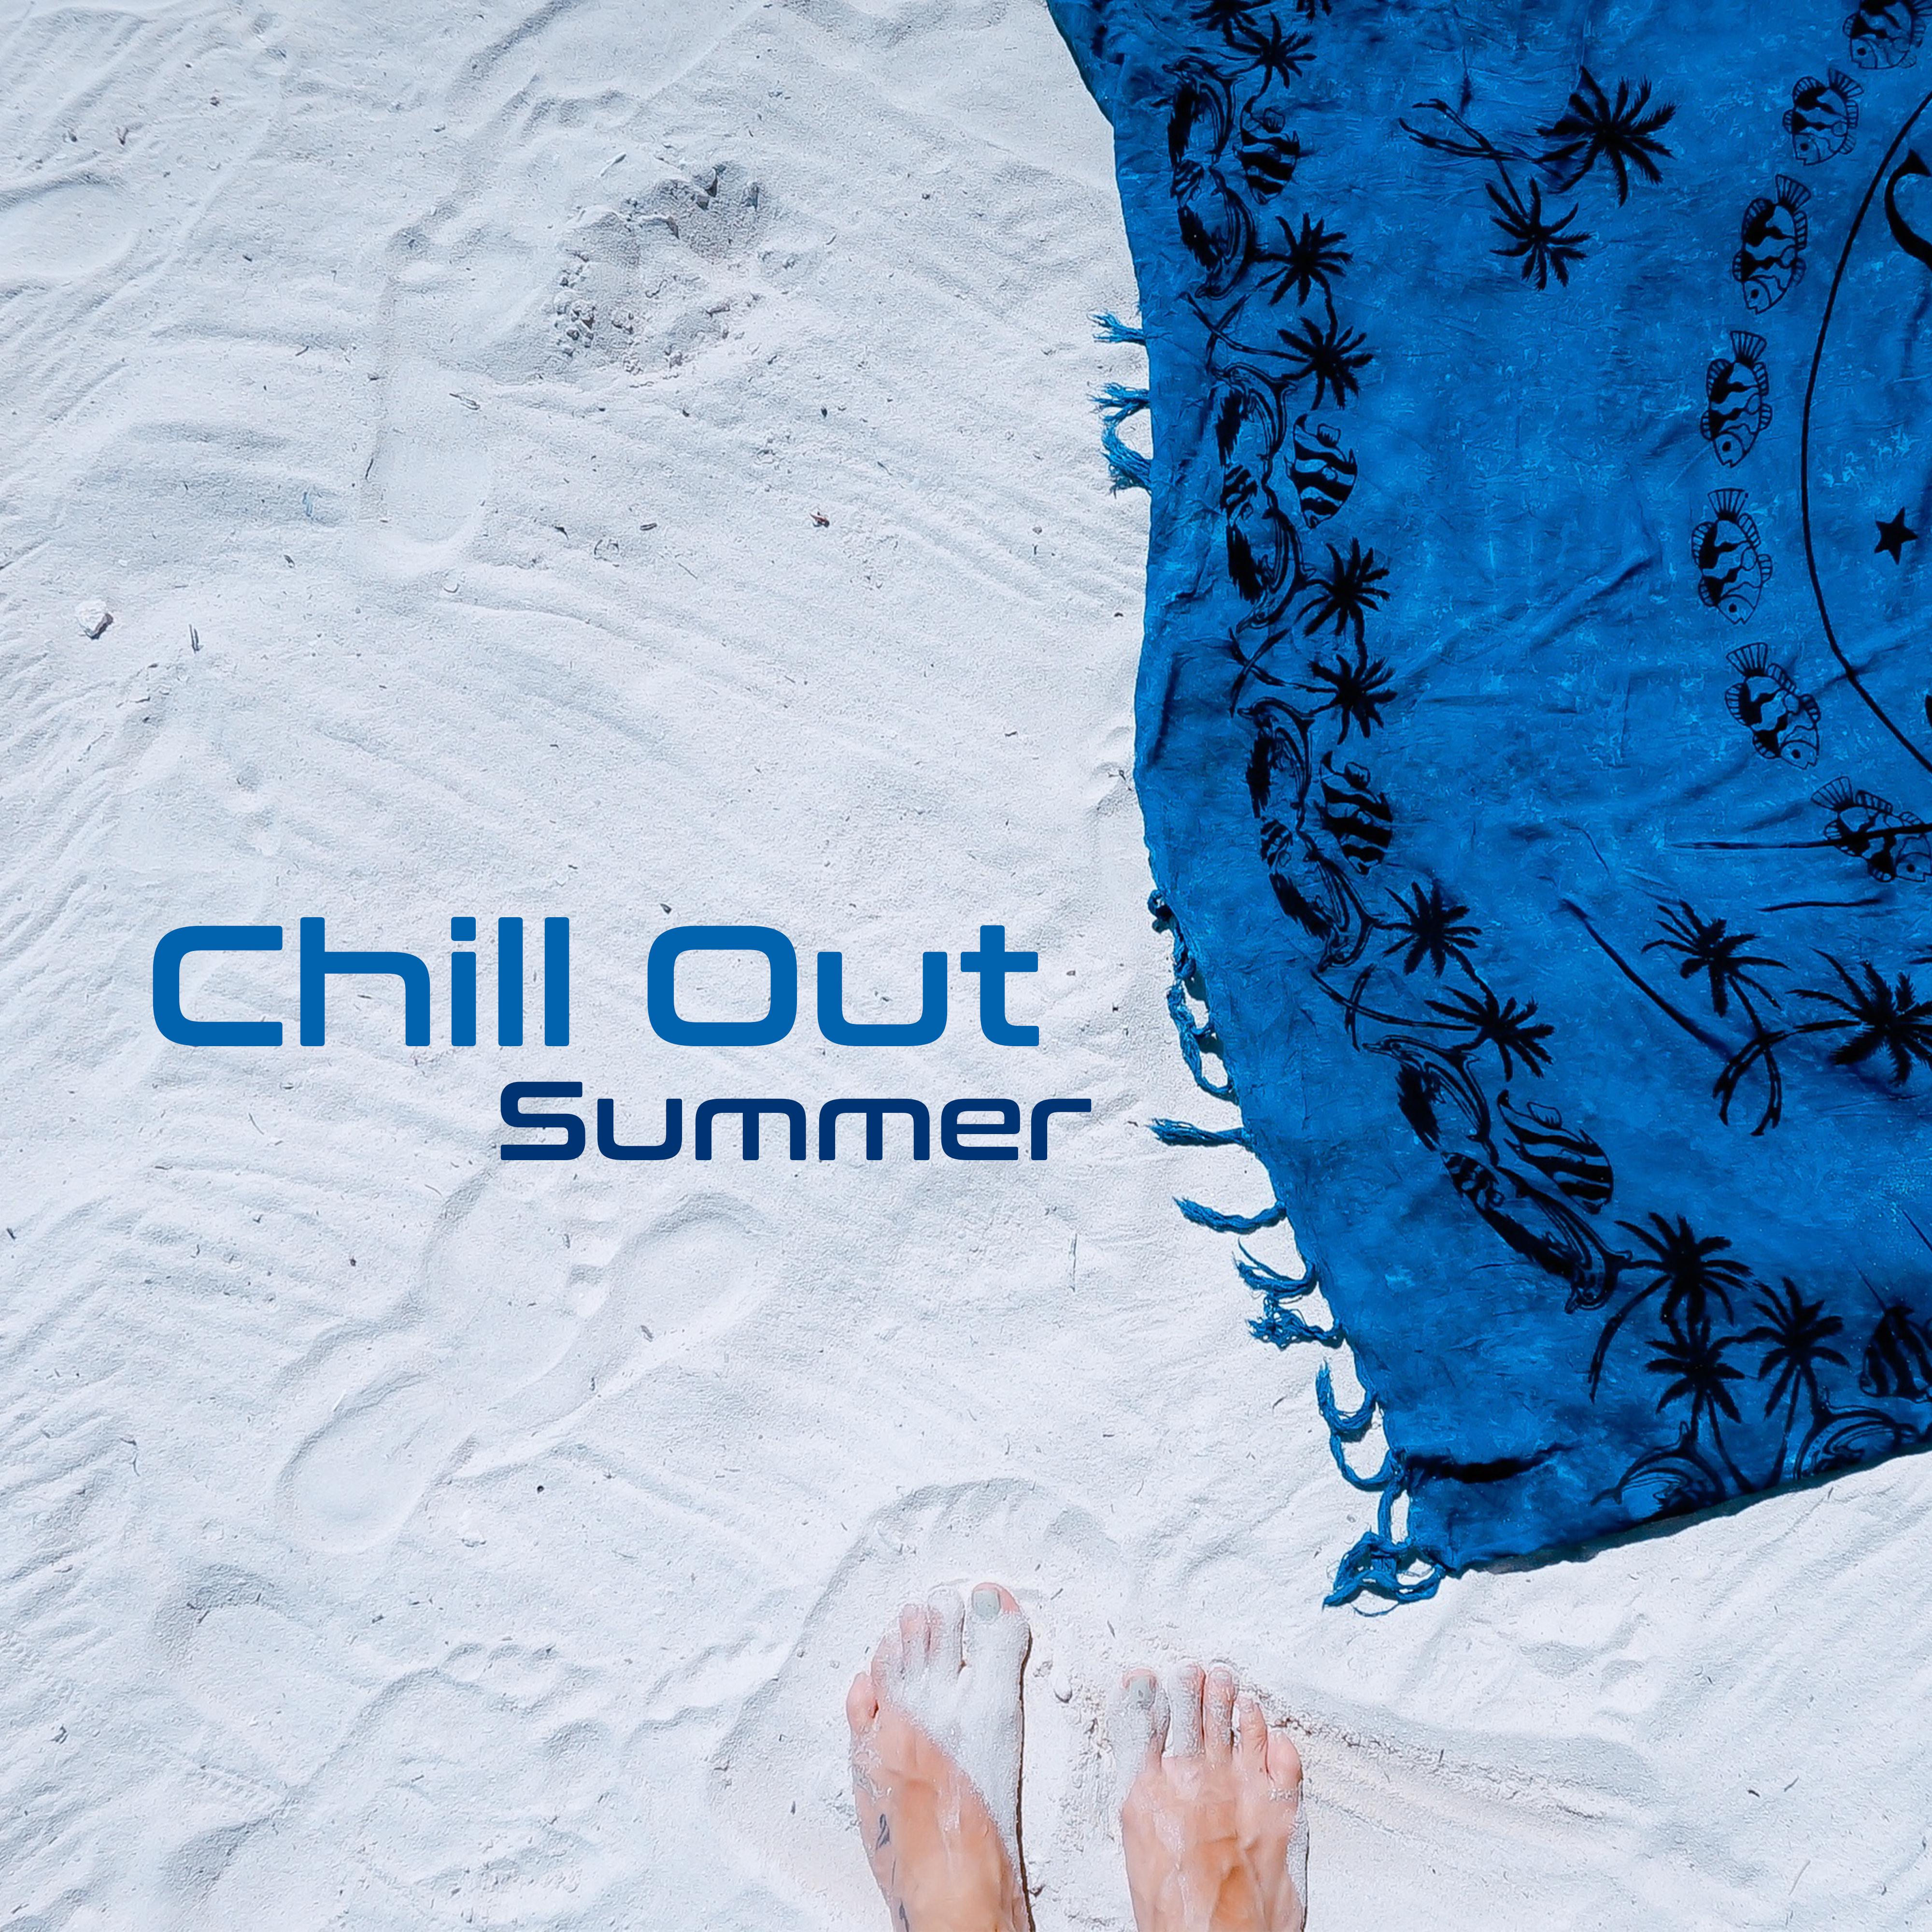 Chill Out Summer  Calm Sounds for Holidays, Tropical Island, Waves of Calmness, Sunny Day